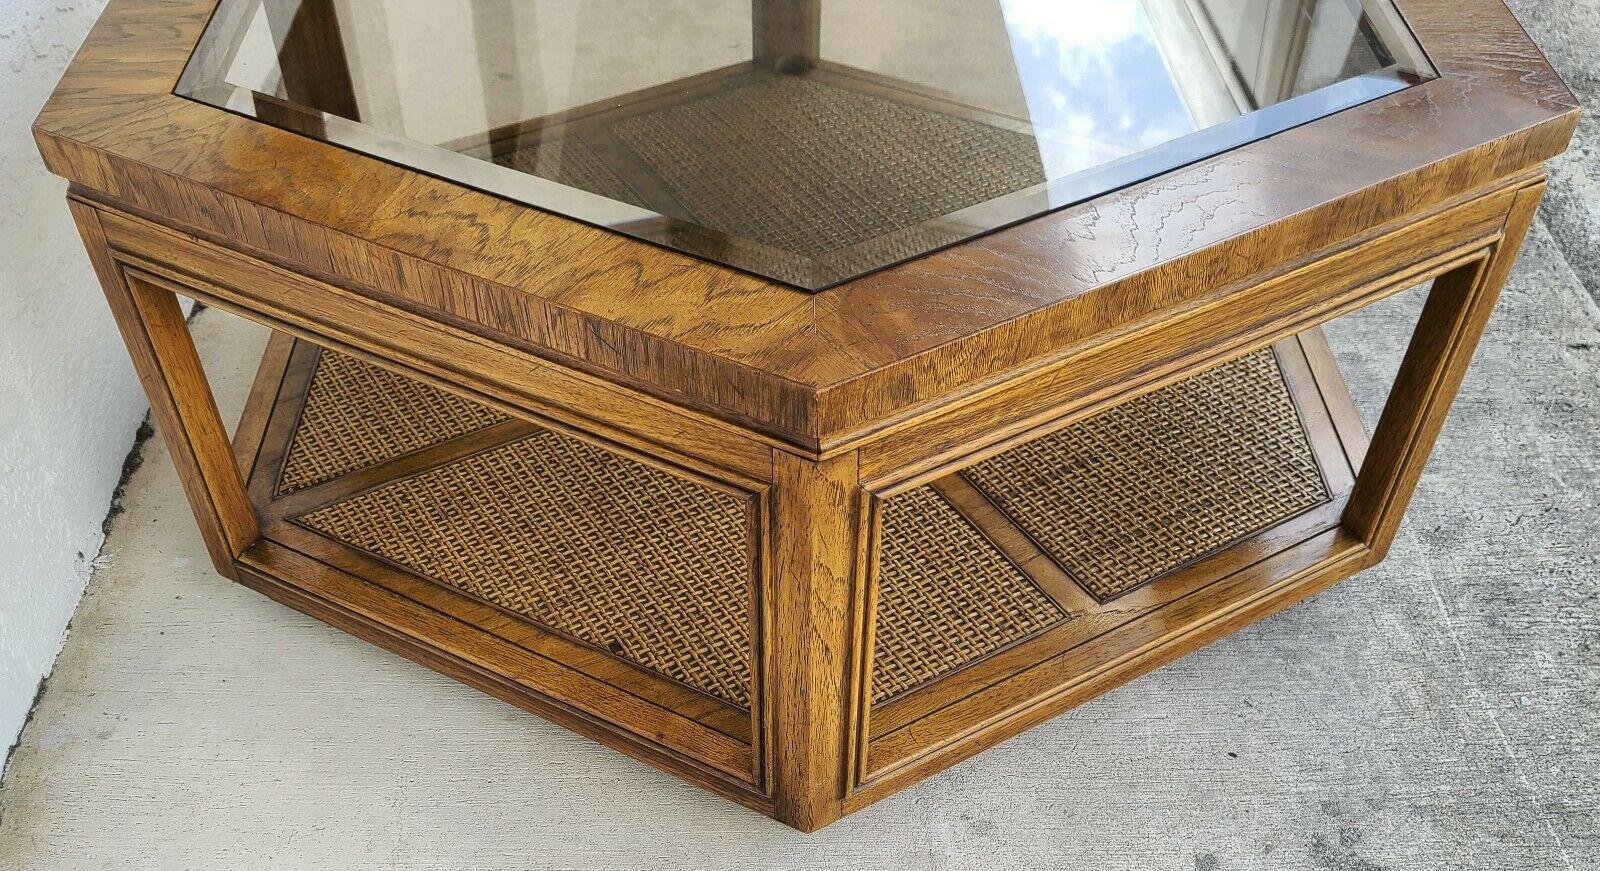 Late 20th Century Vintage Accolade Hexagonal Glass Wicker Coffee Table by Drexel